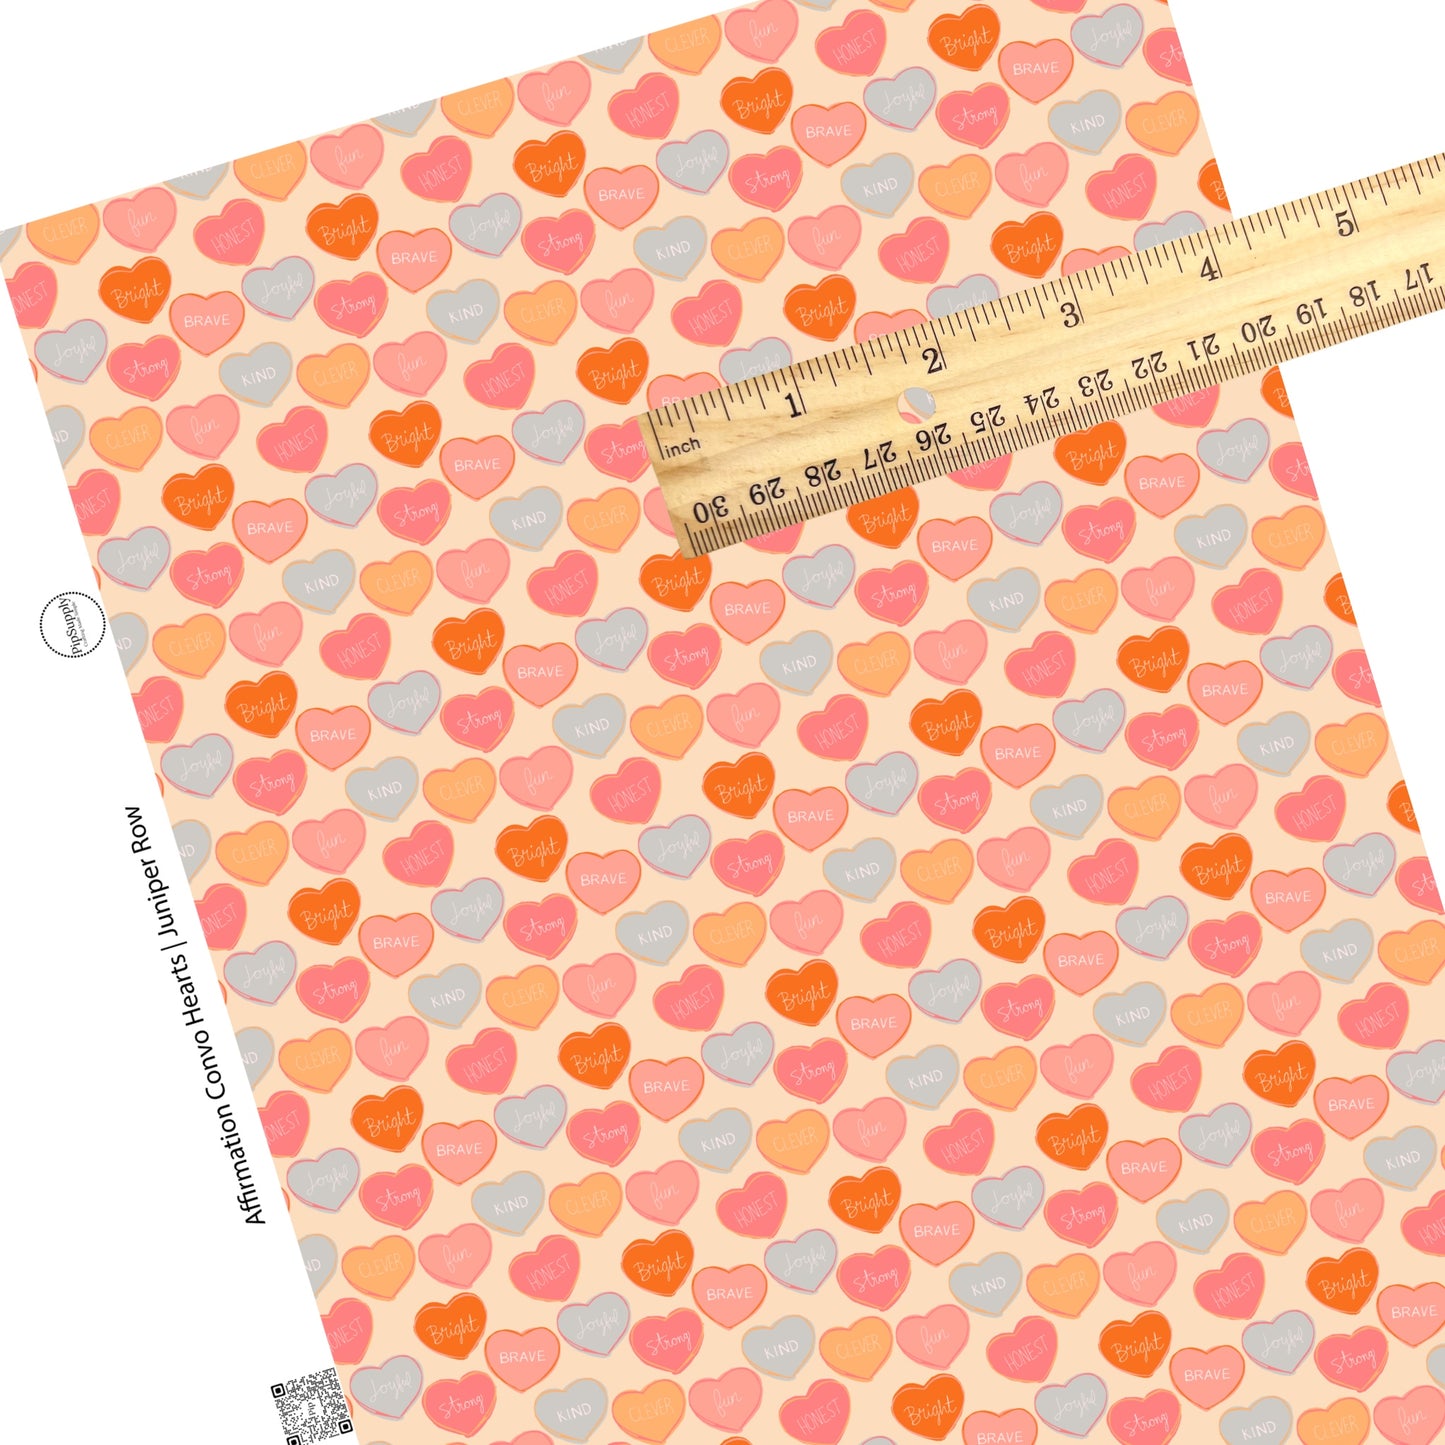 These Valentine's pattern themed faux leather sheets contain the following design elements: pastel colored affirmation conversation hearts on cream. Our CPSIA compliant faux leather sheets or rolls can be used for all types of crafting projects.